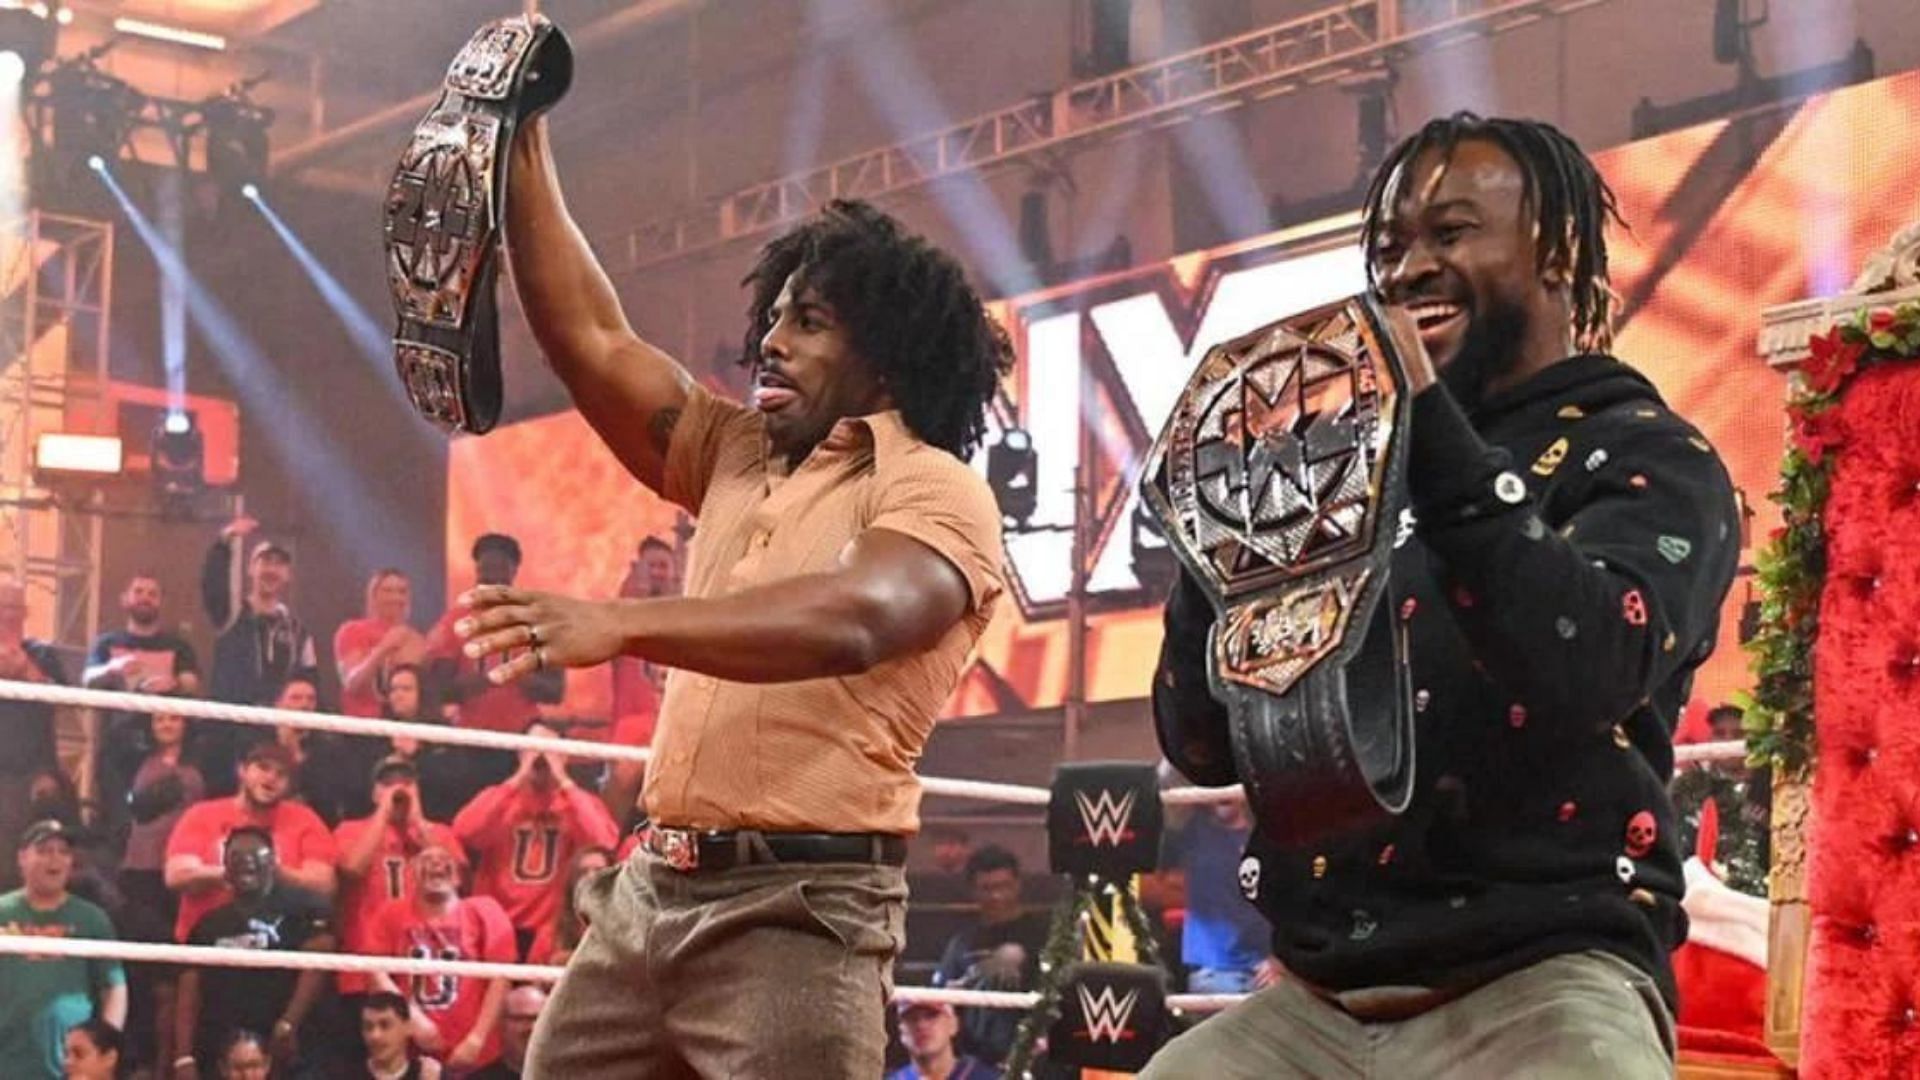 Kofi Kingston and Xavier Woods are members of The New Day